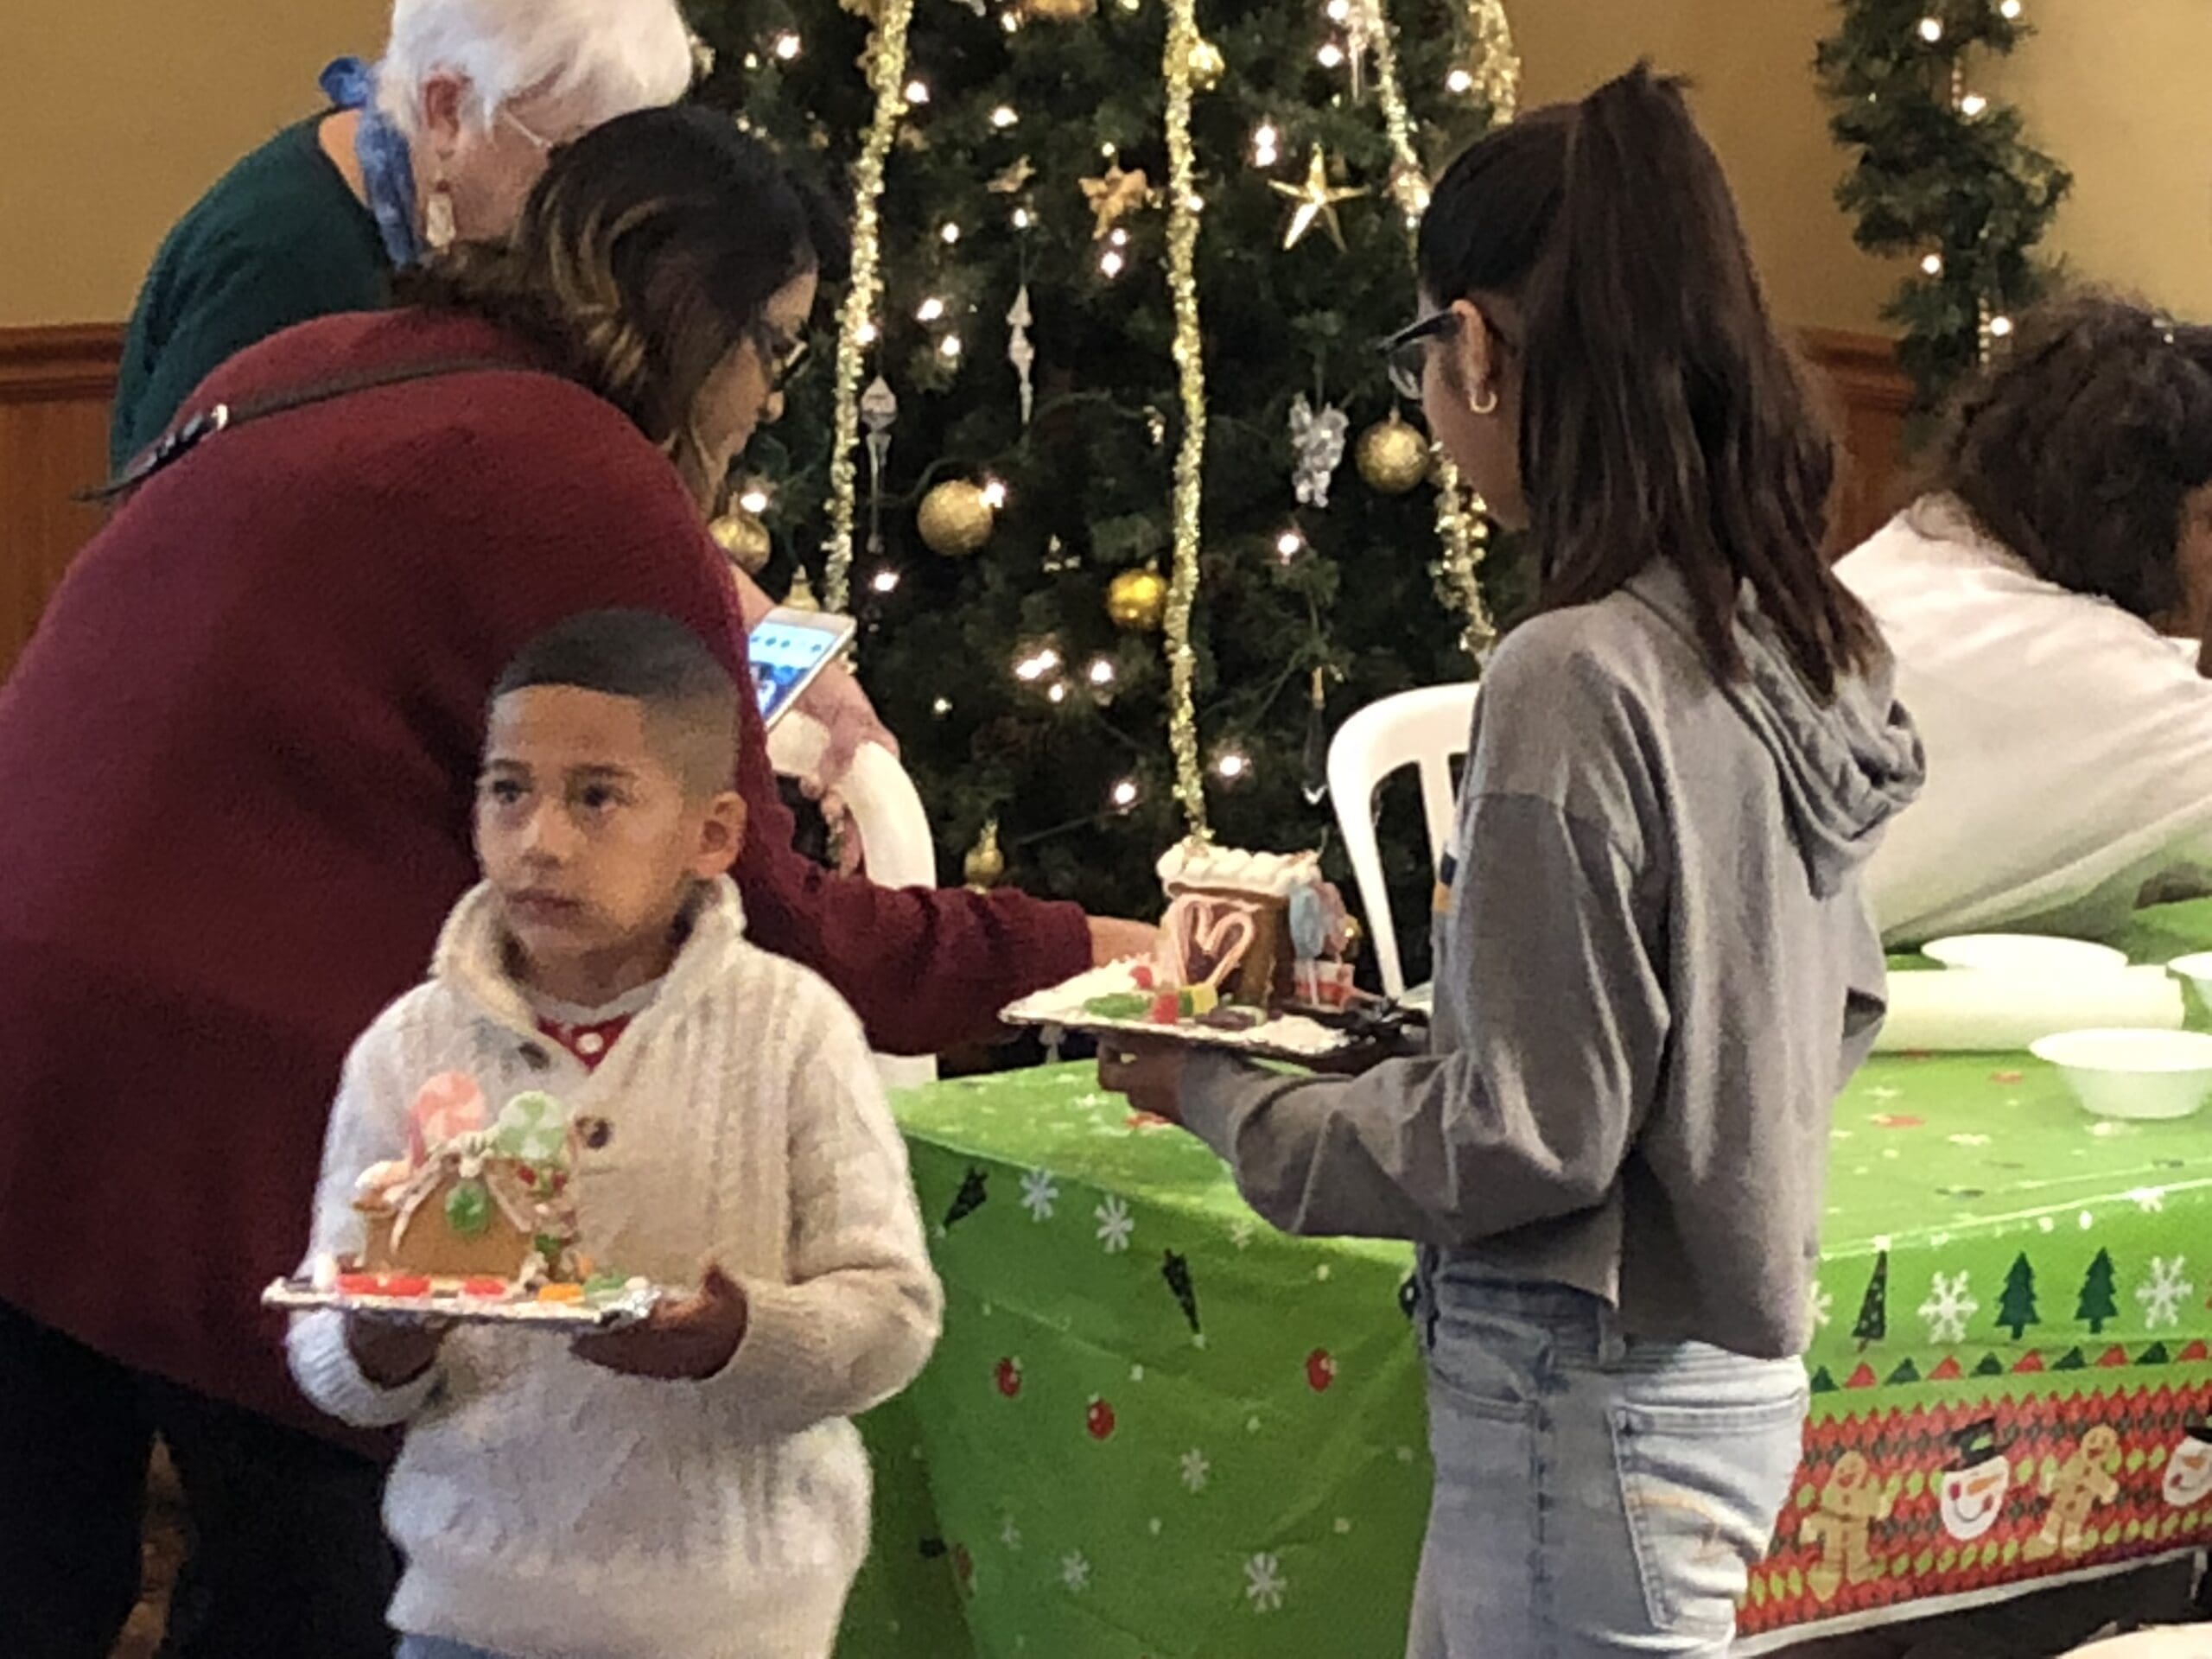 Two children holding gingerbread houses at a Christmas party in Heritage Square, with a decorated tree in the background and other people around.